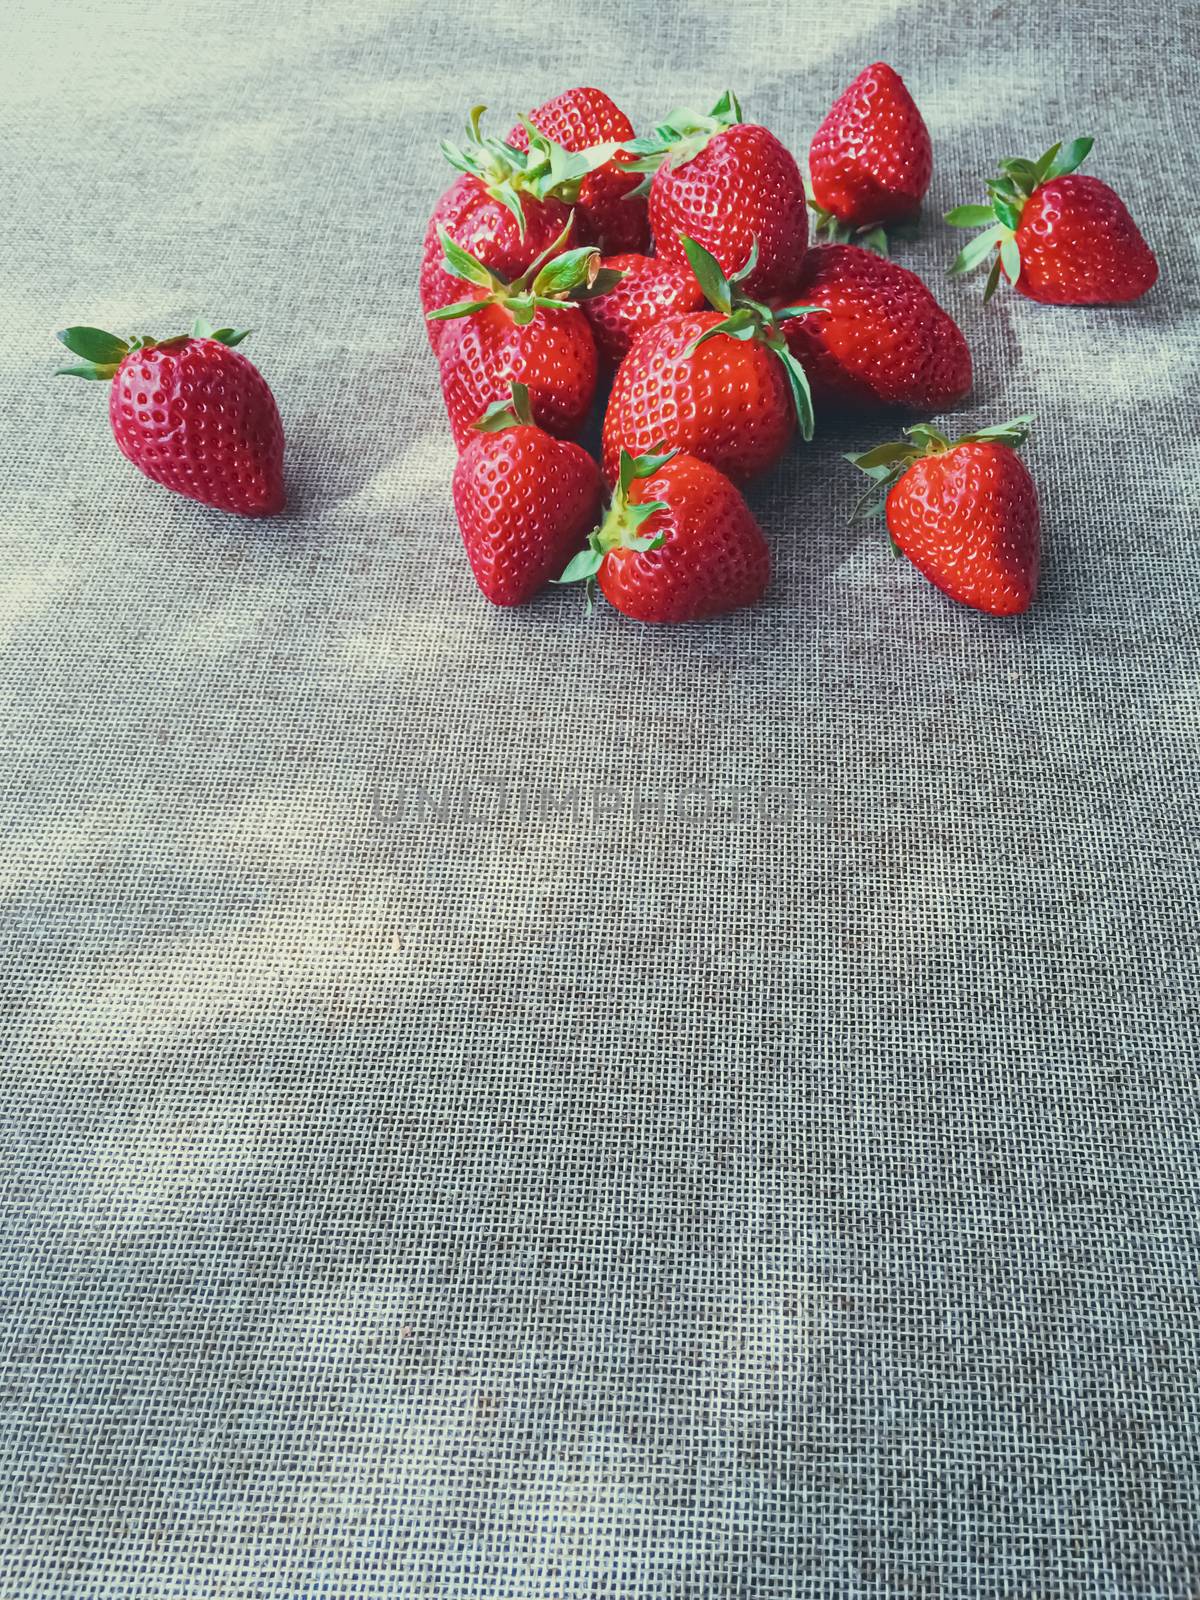 Organic strawberries on rustic linen background by Anneleven